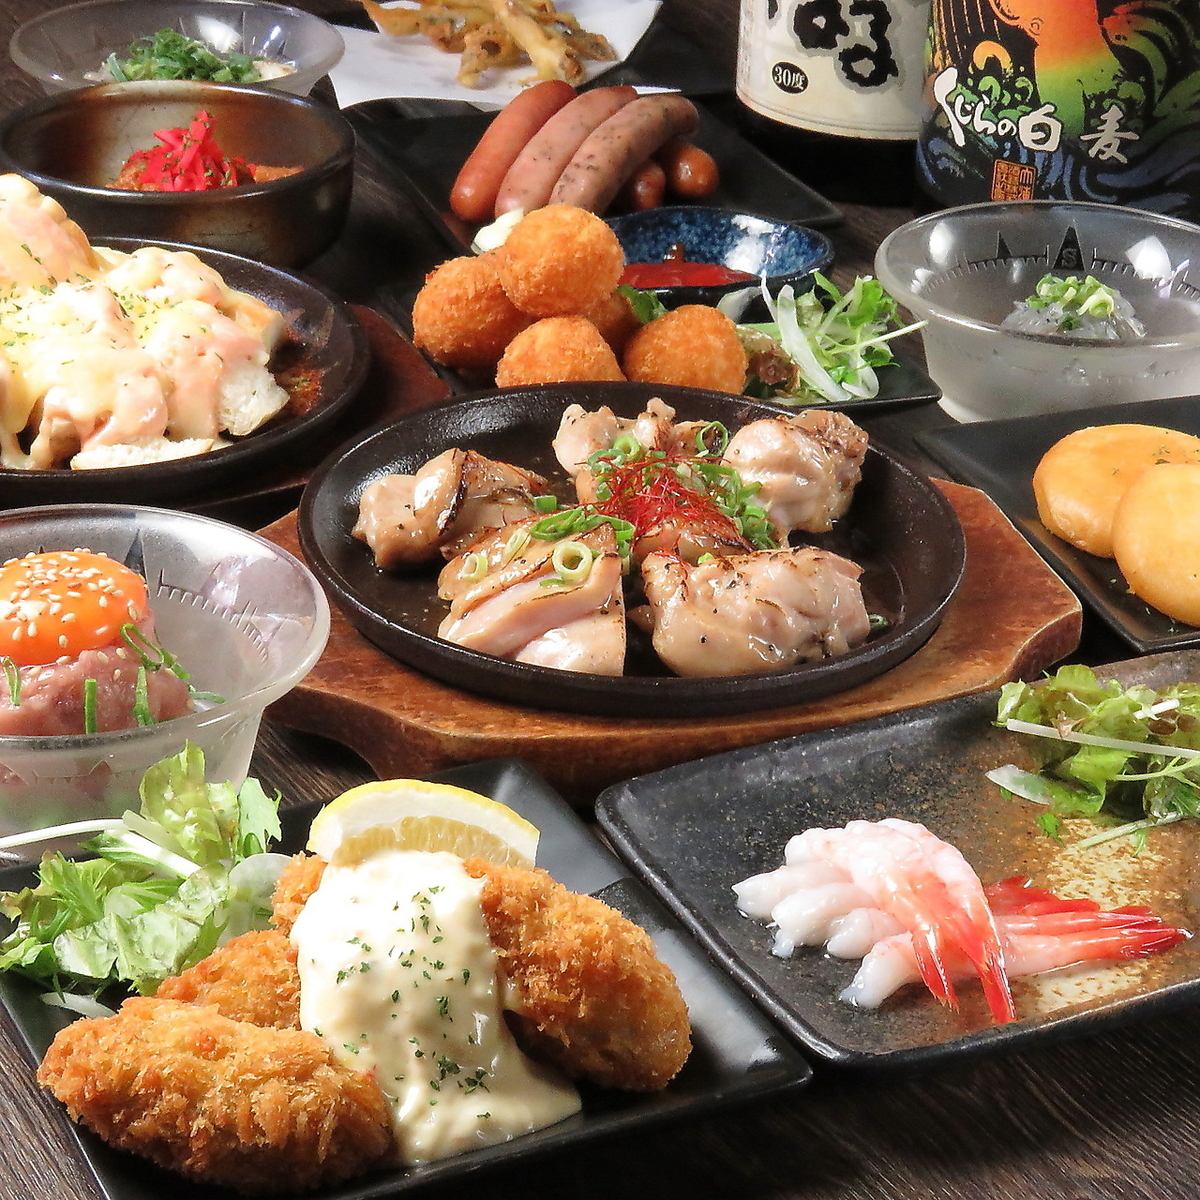 Recommended for girls-only gatherings♪ All-you-can-eat and drink! 3,980 JPY for 2 hours ⇒ 3,300 JPY (incl. tax)!